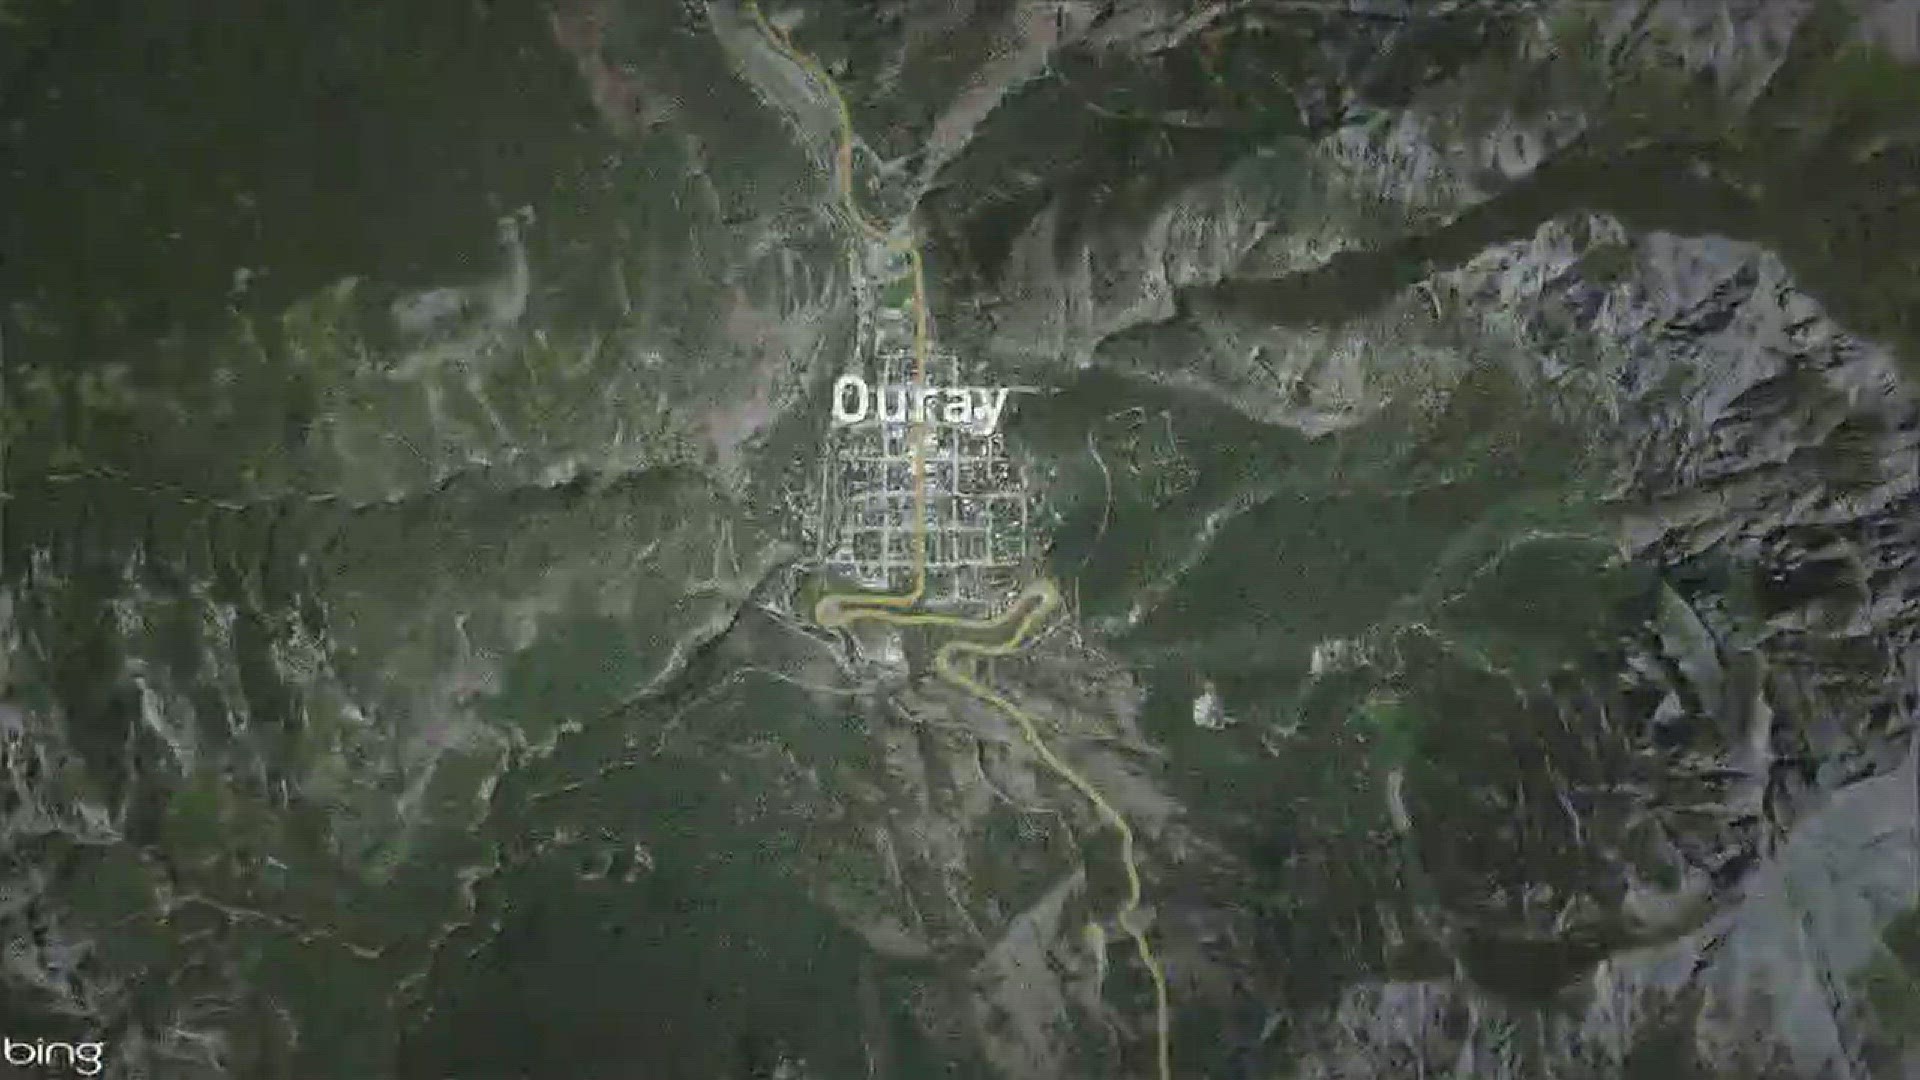 We're talking about Ouray.